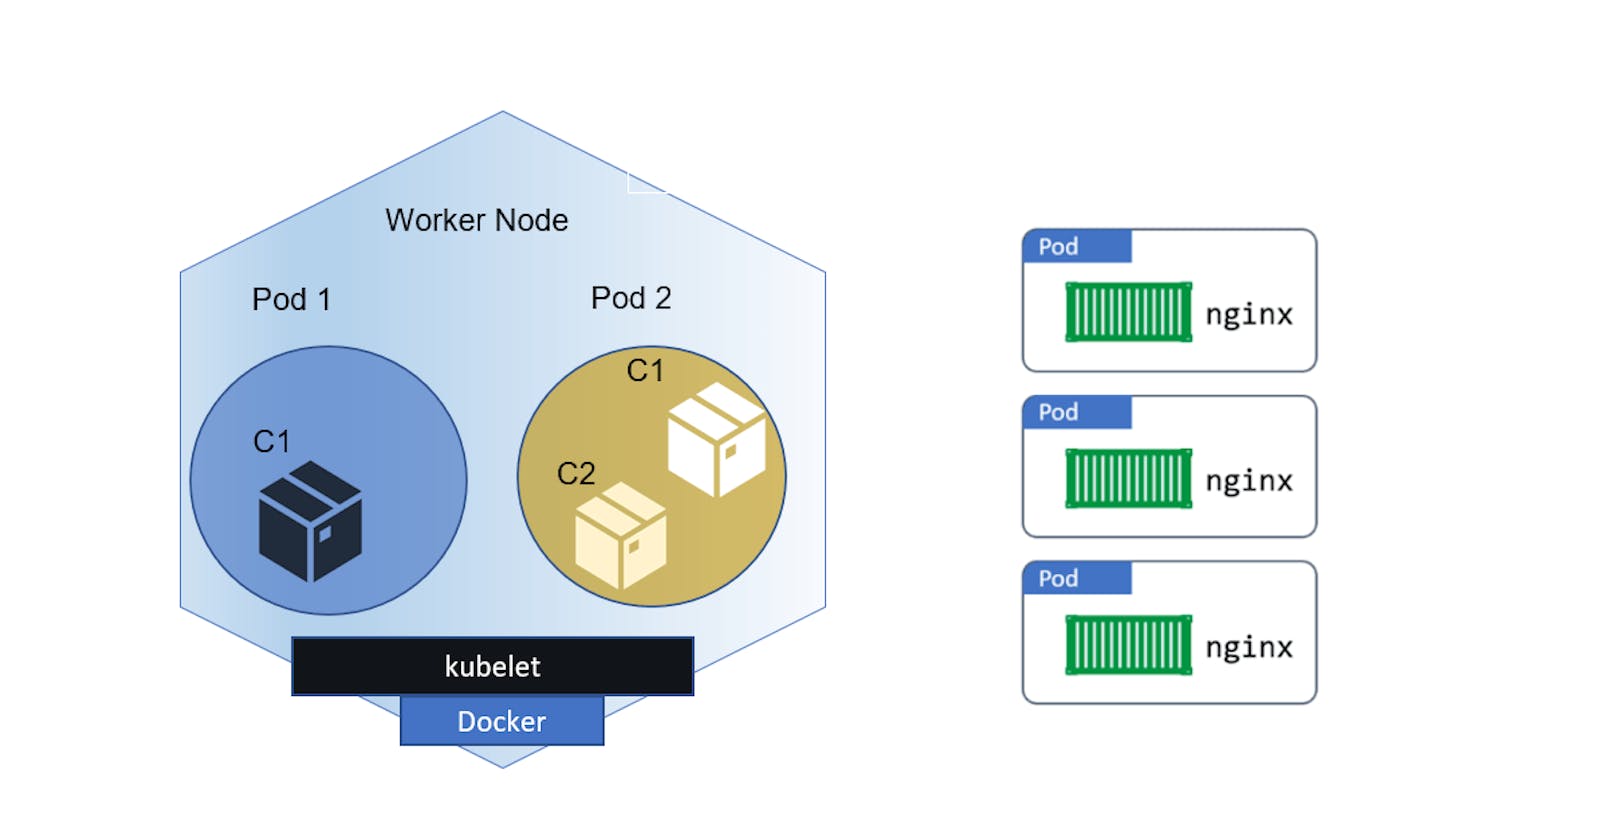 Kubernetes Pod in simple terms